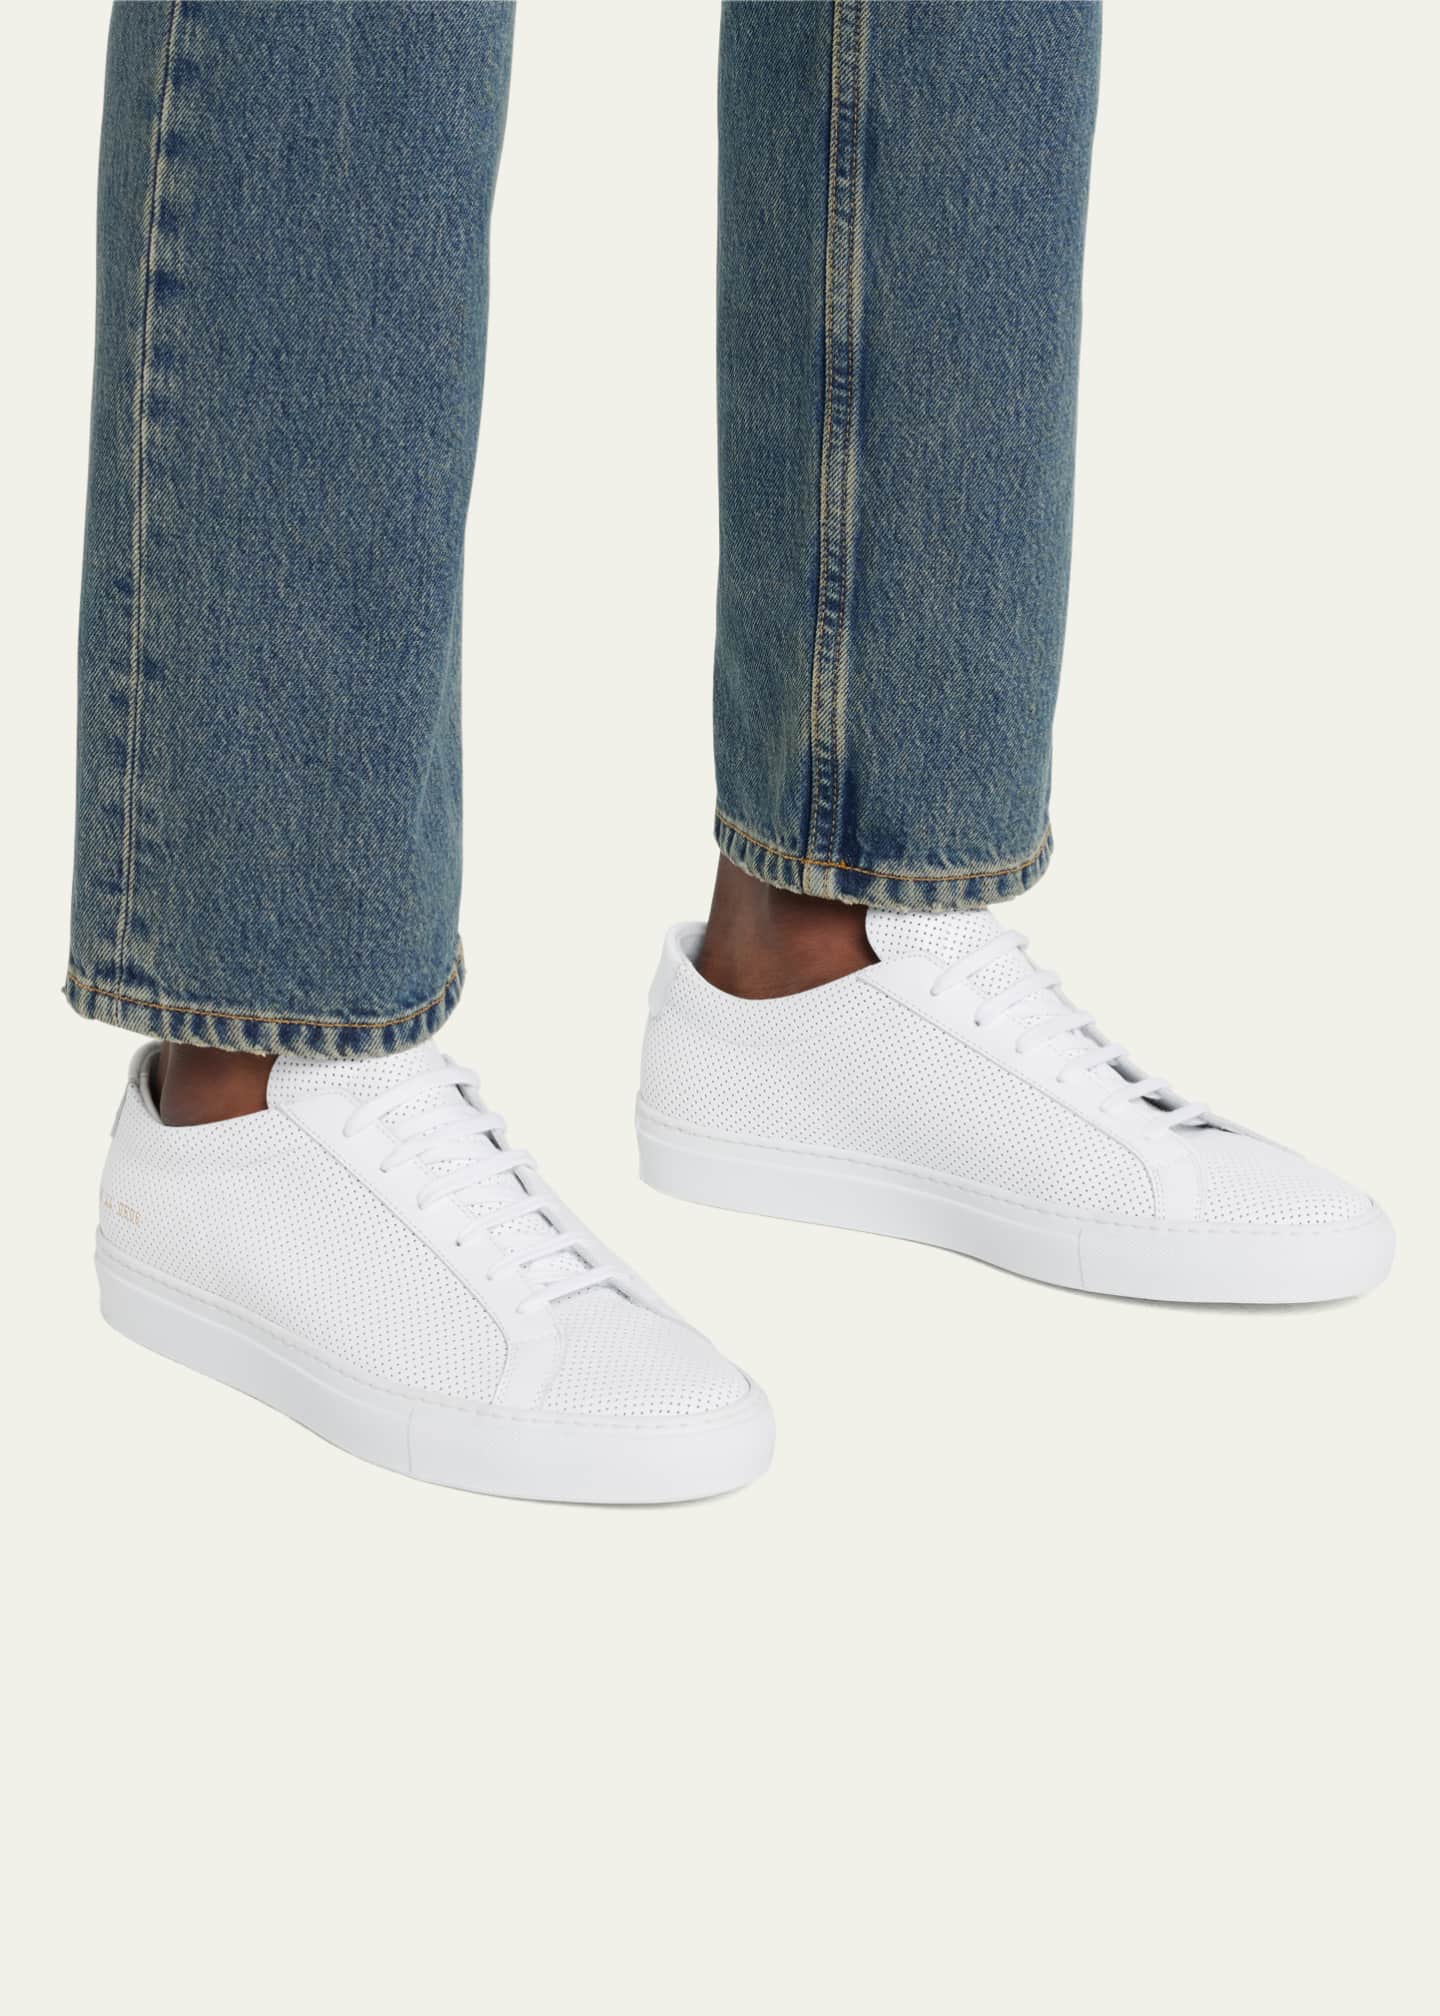 Common Projects Men's Original Achilles Perforated Low-Top - Bergdorf Goodman